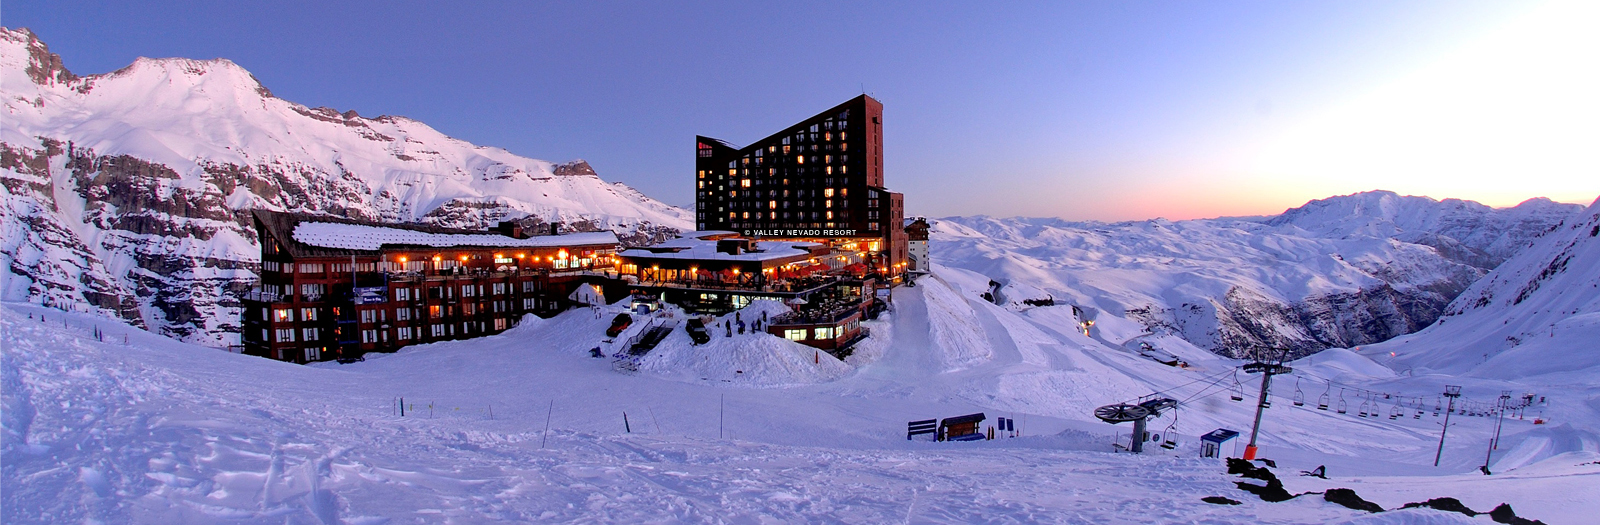 Valle Nevado hotel deals stay and ski packages